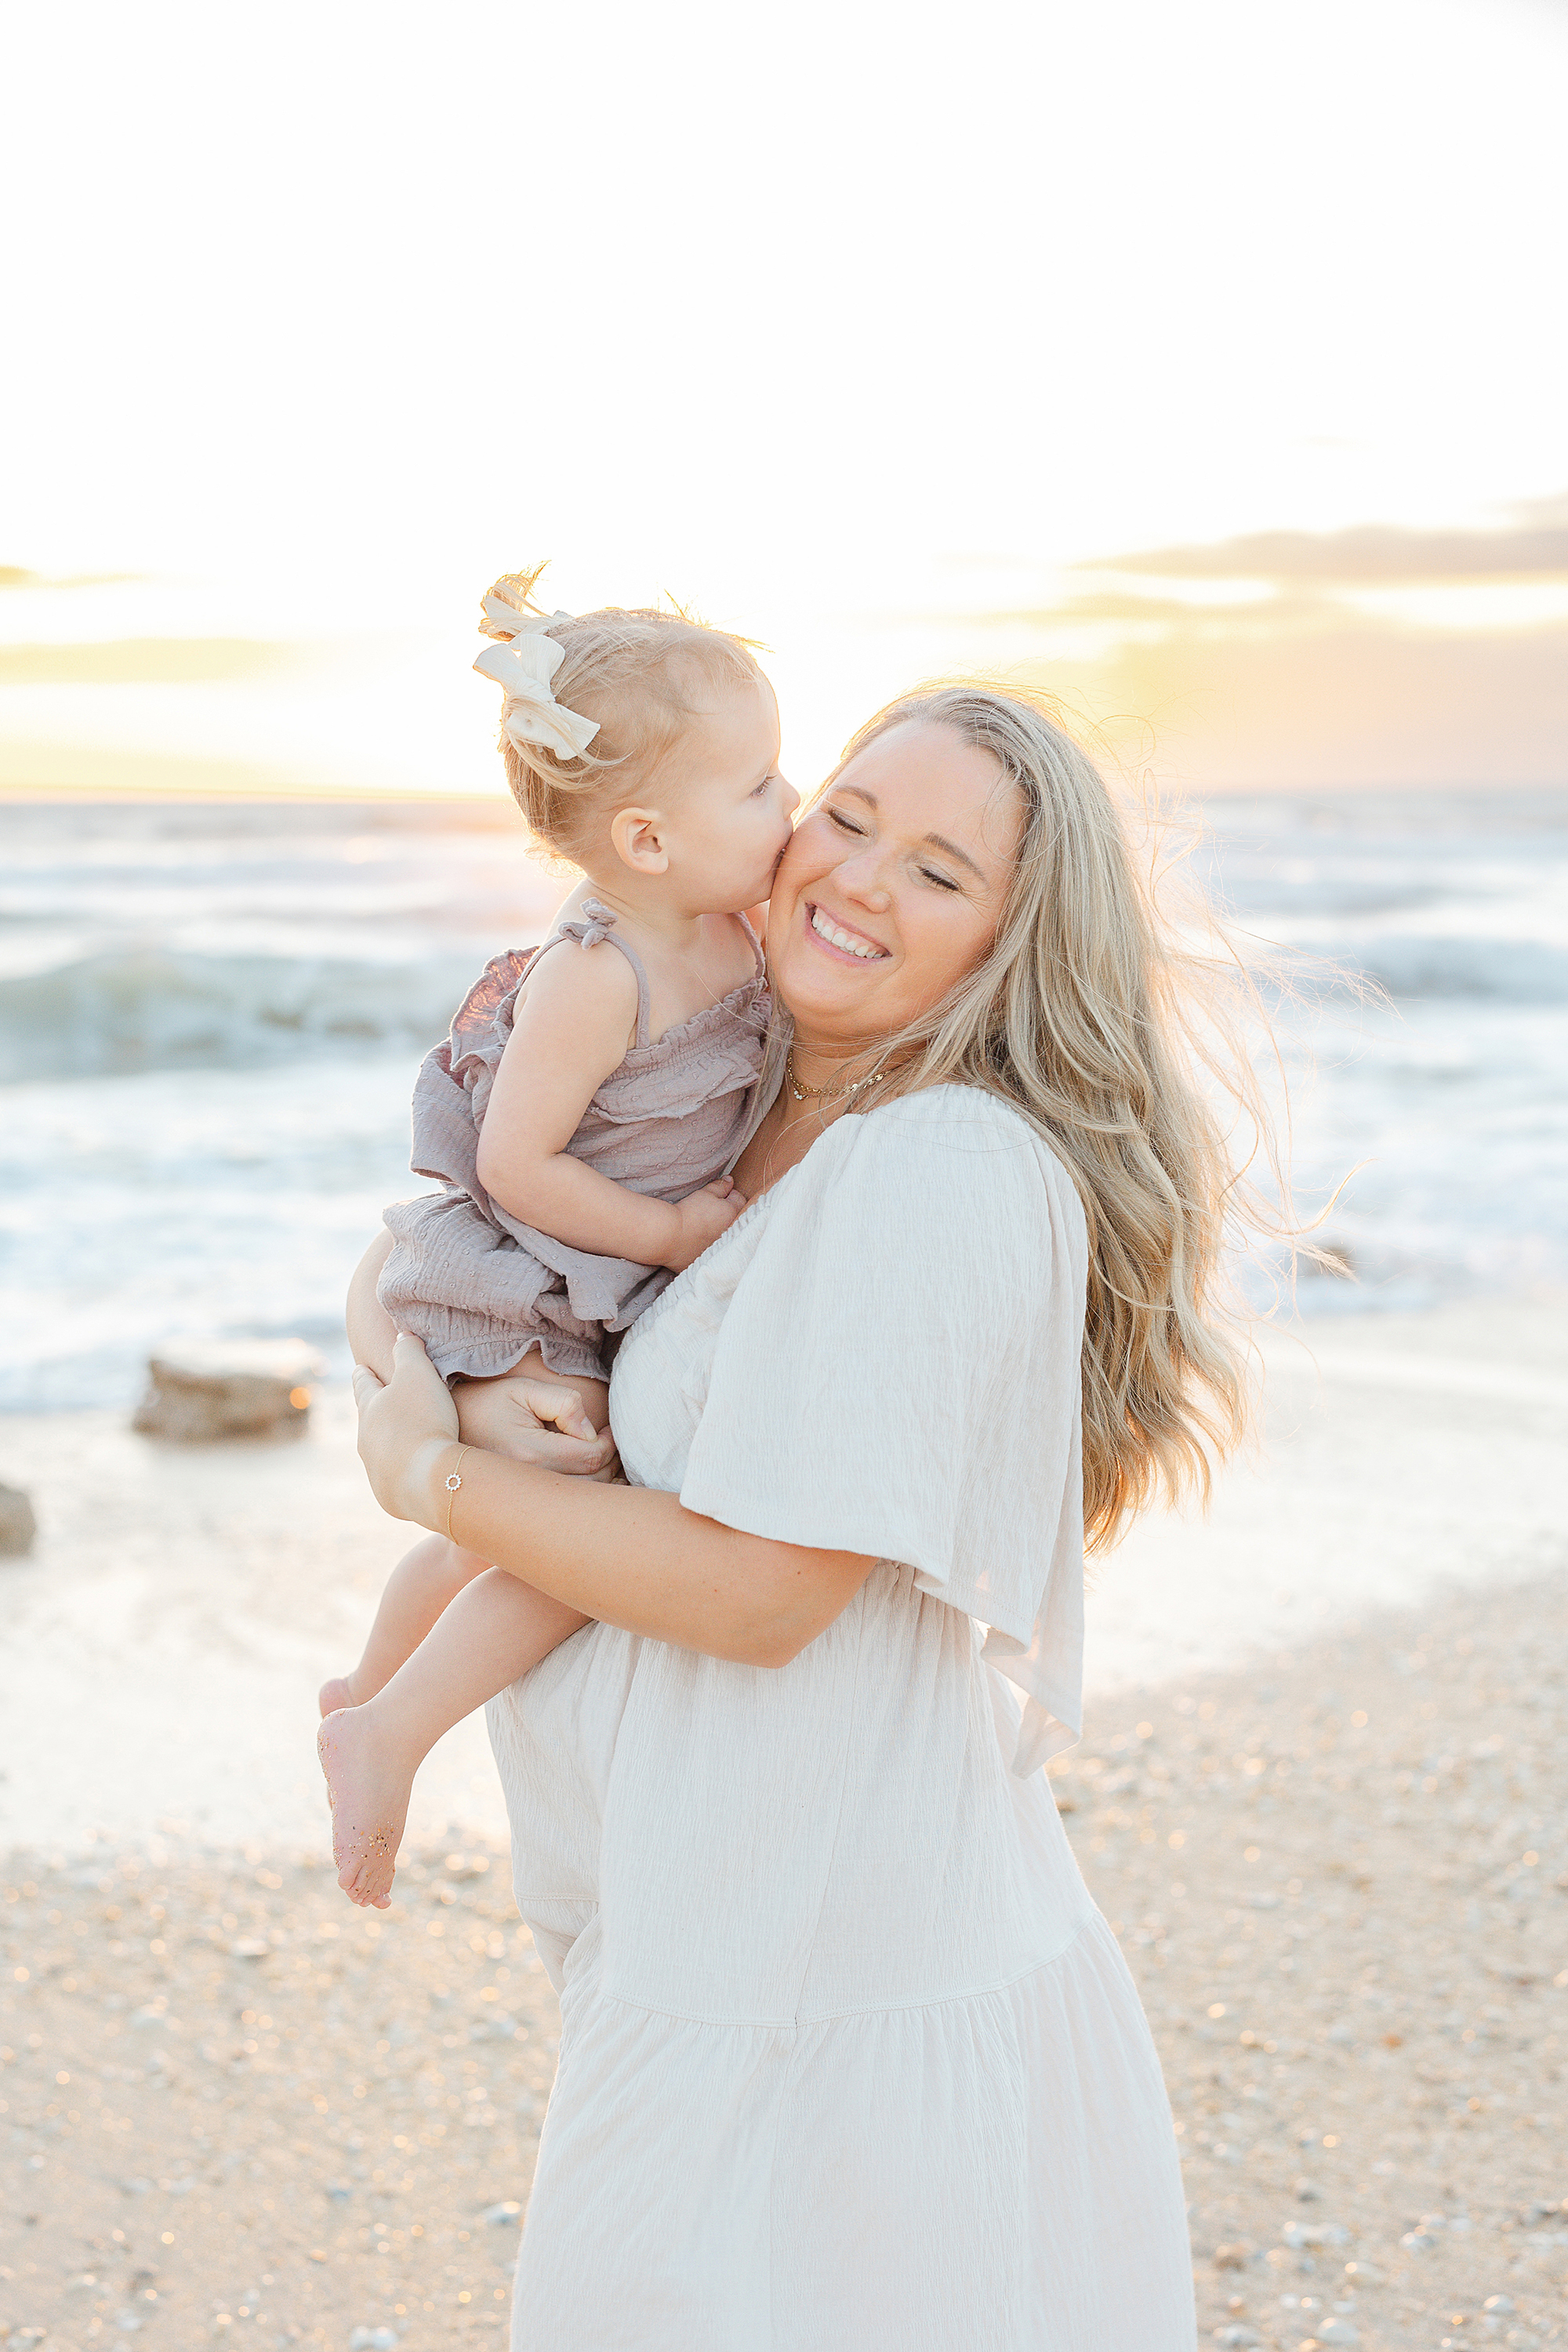 Light and airy sunrise portrait of mother with baby daughter.